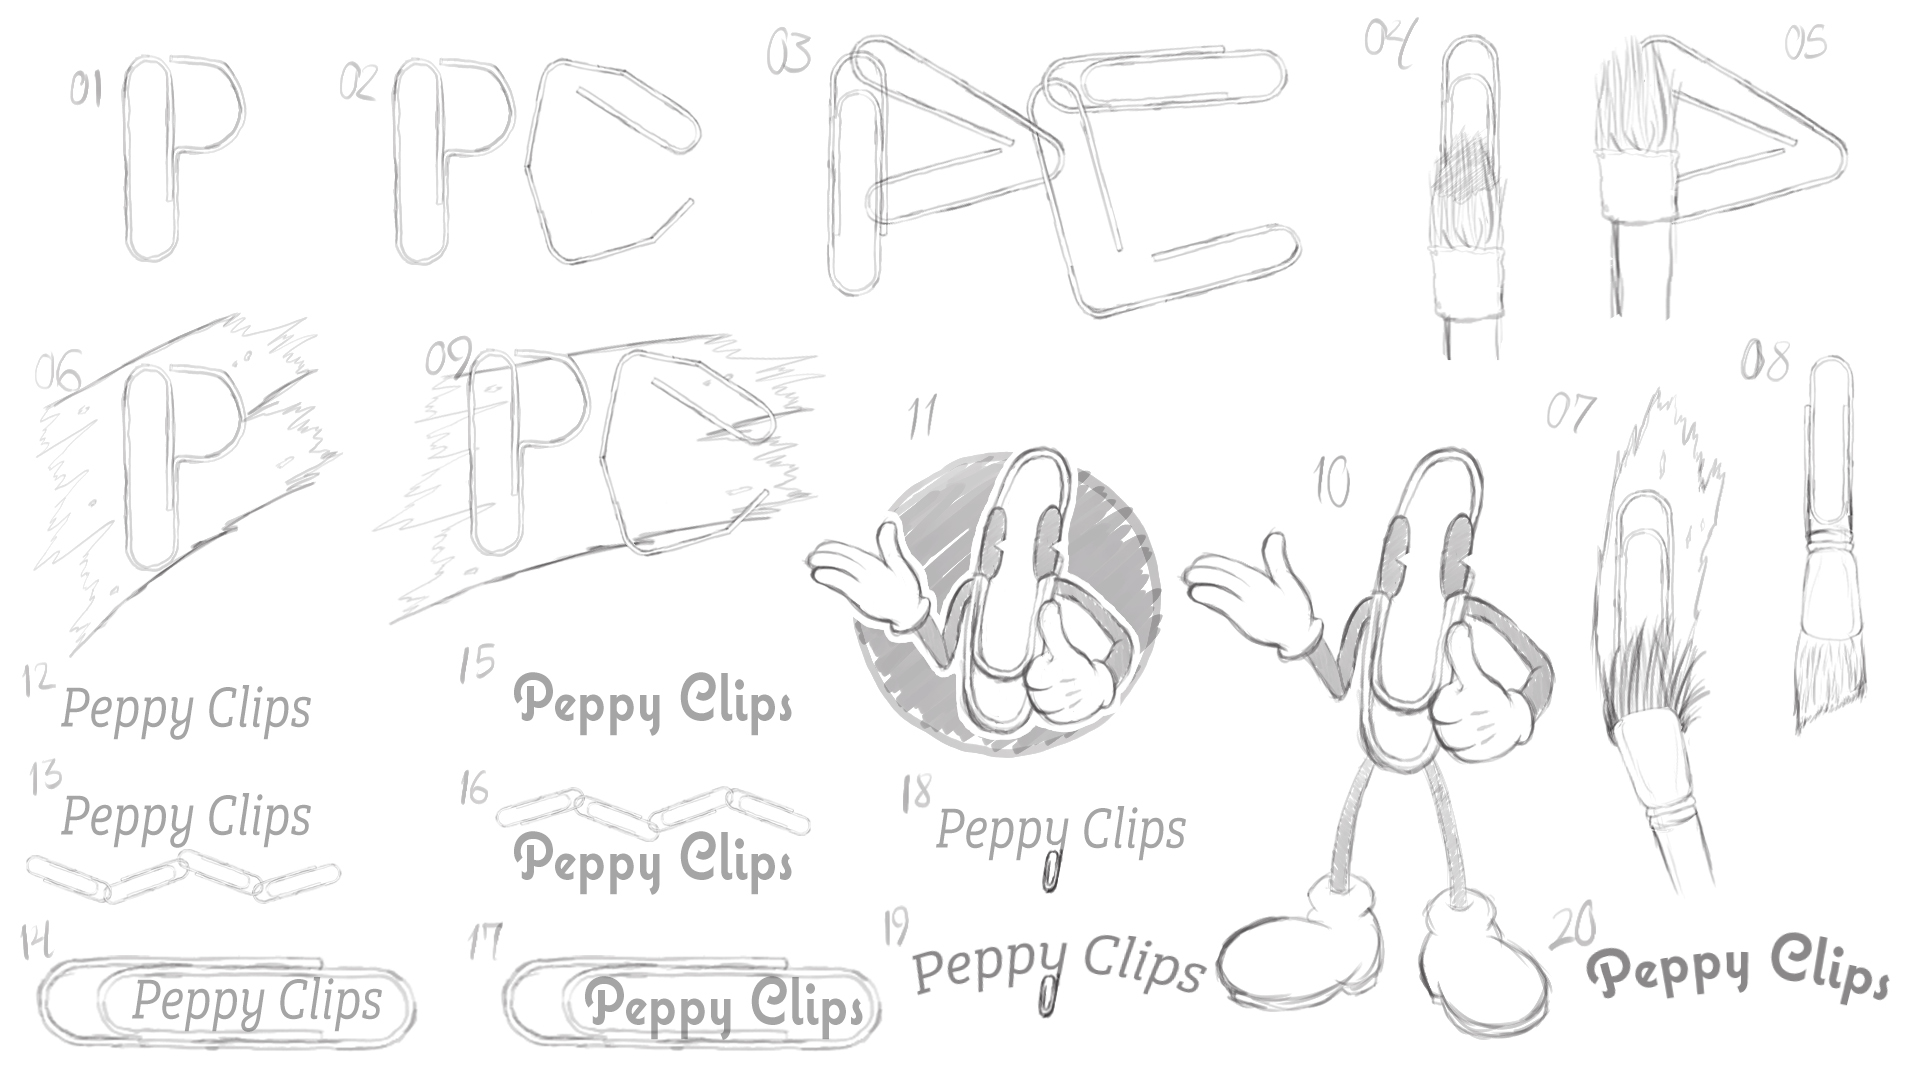 Peppy Clips logo sketches